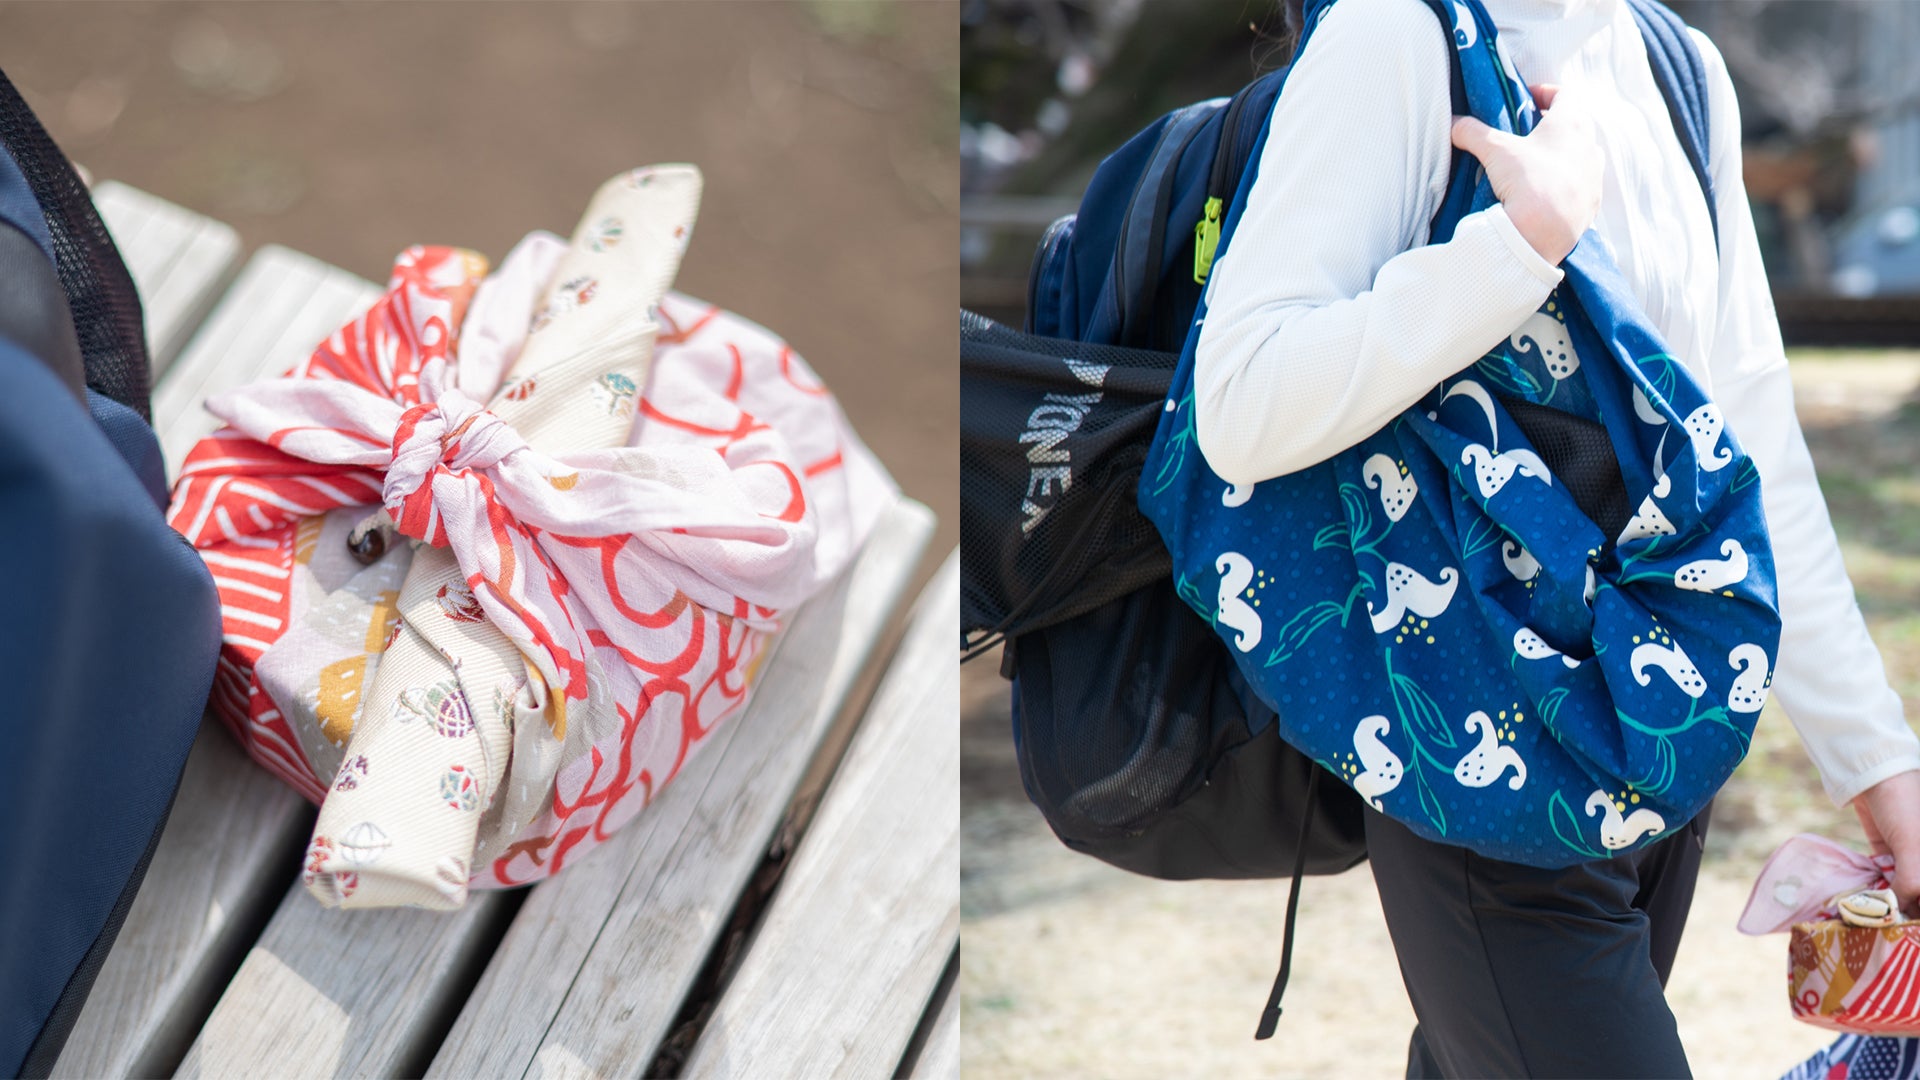 An Exploratory Day Spent with Furoshiki Wrapping Cloths